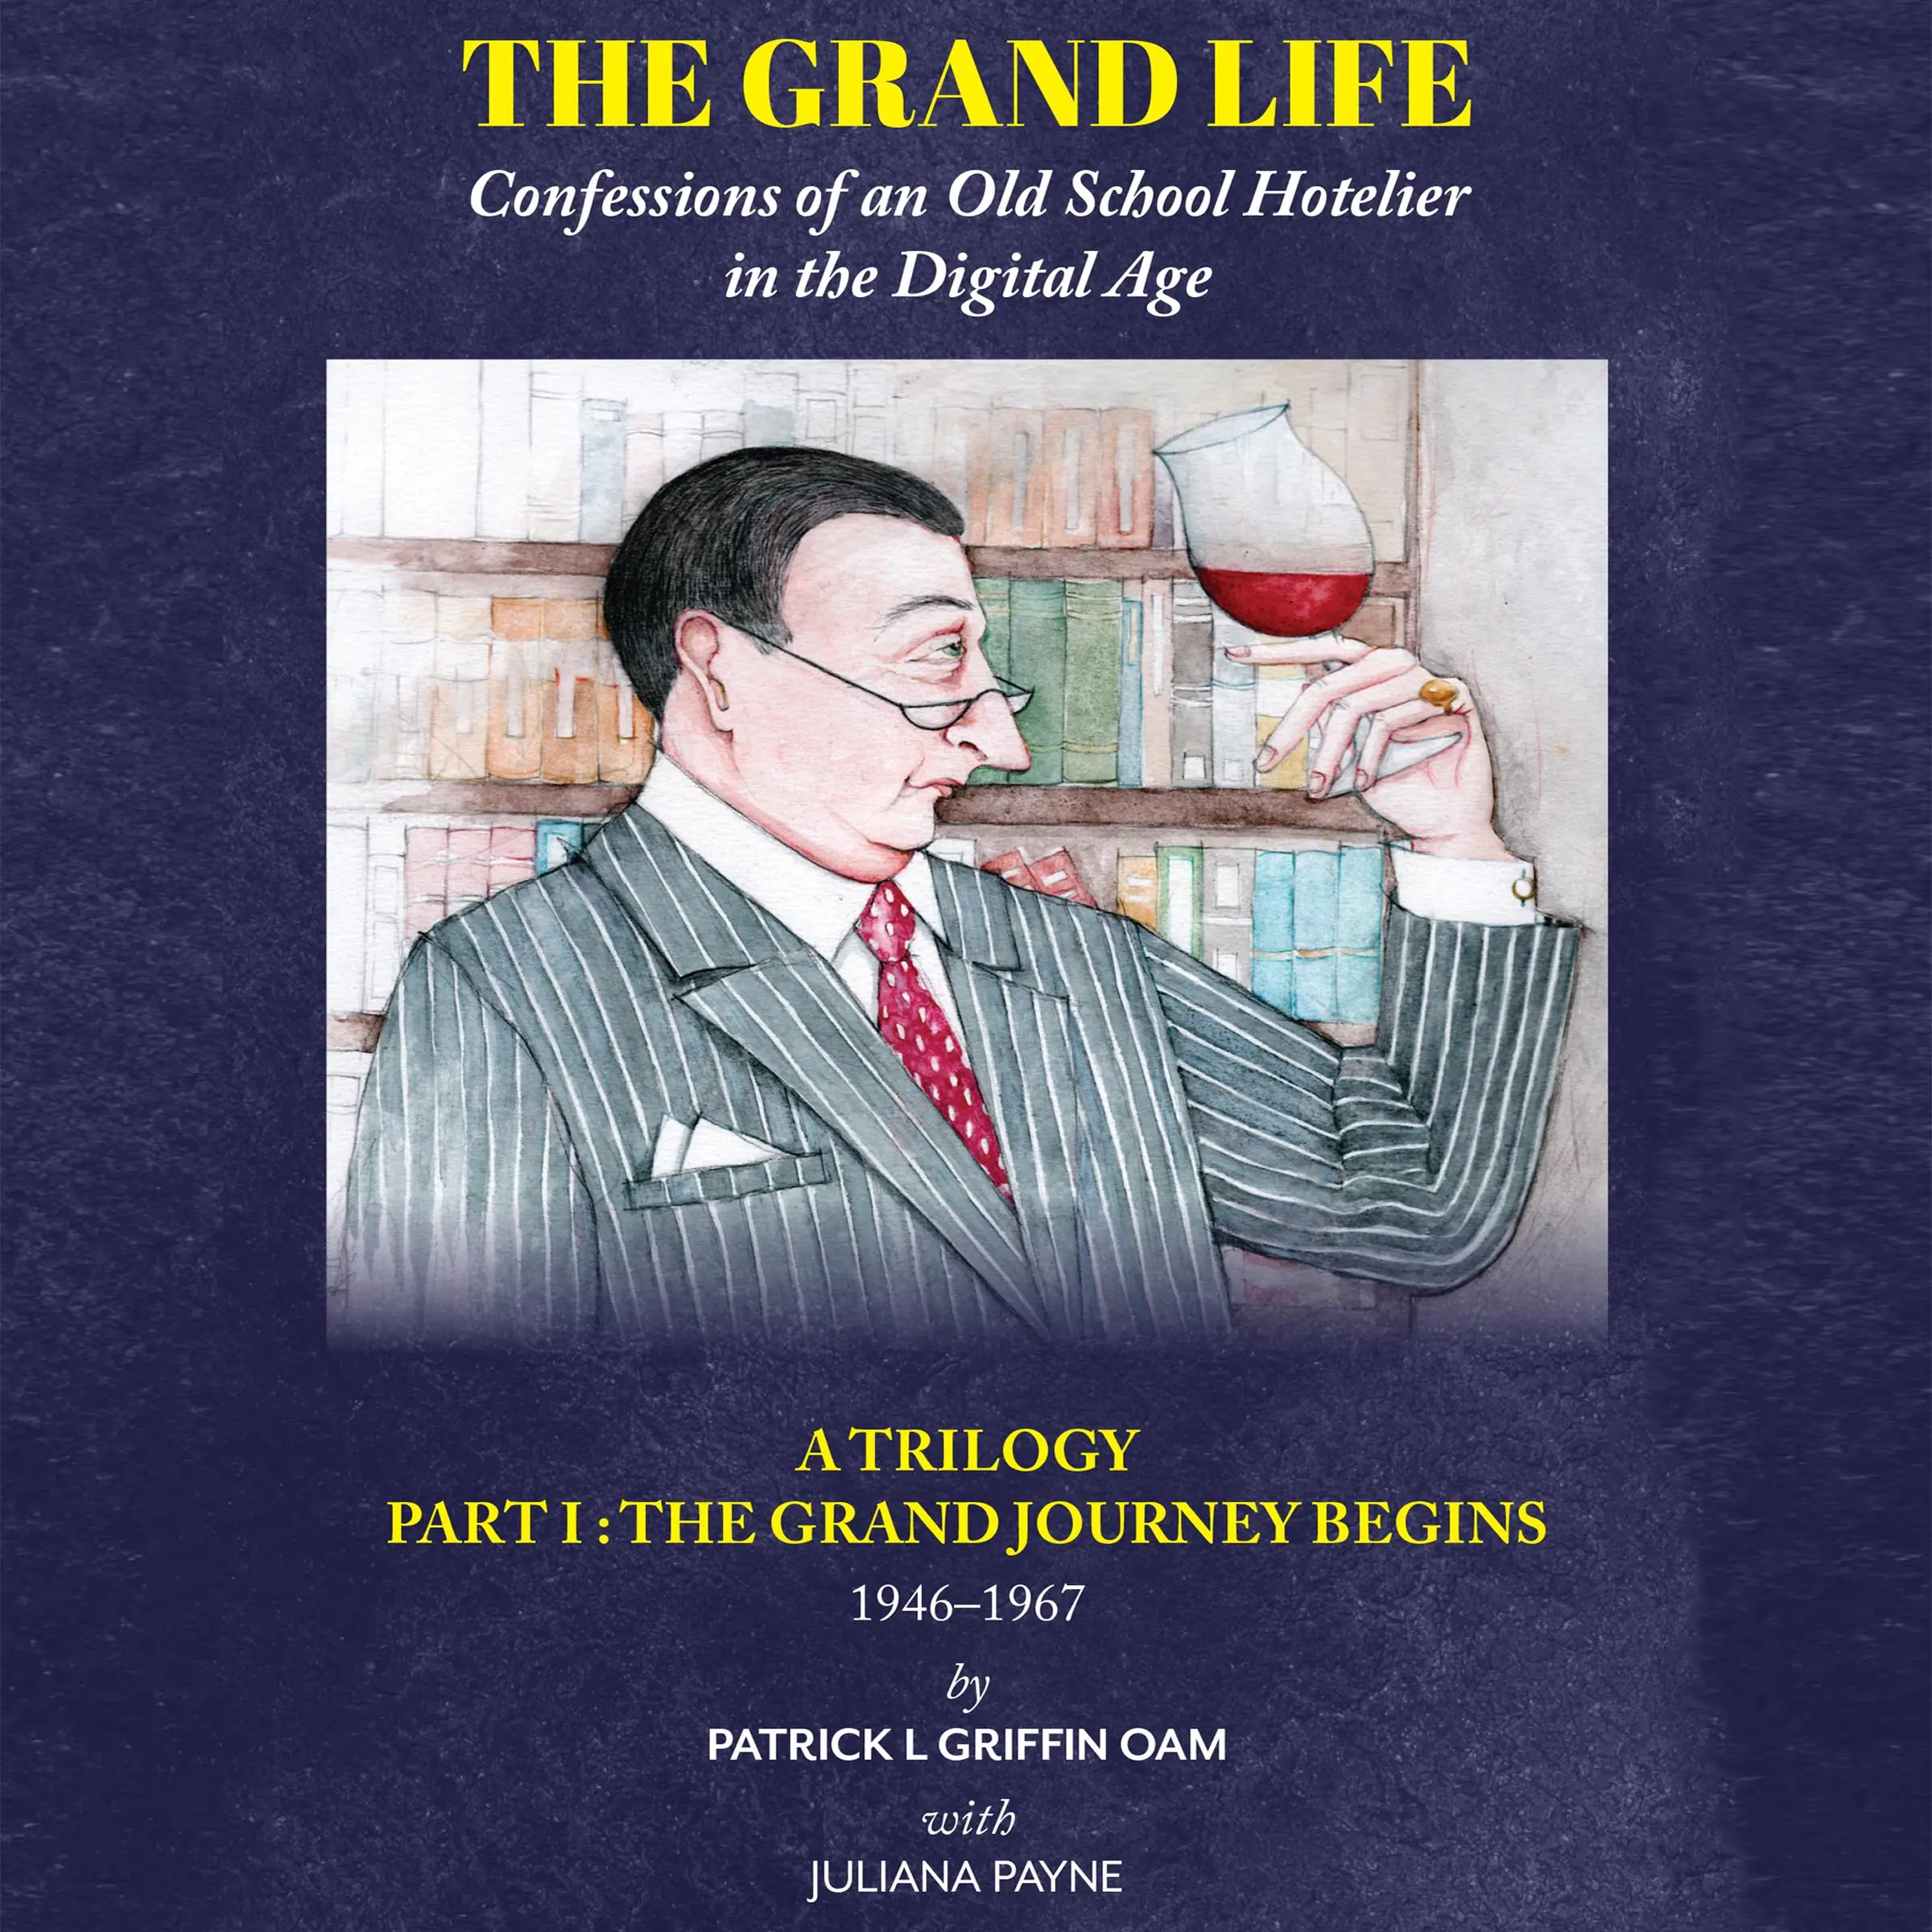 The Grand Life: Confessions of an Old School Hotelier in the Digital Age by Juliana Payne Audiobook